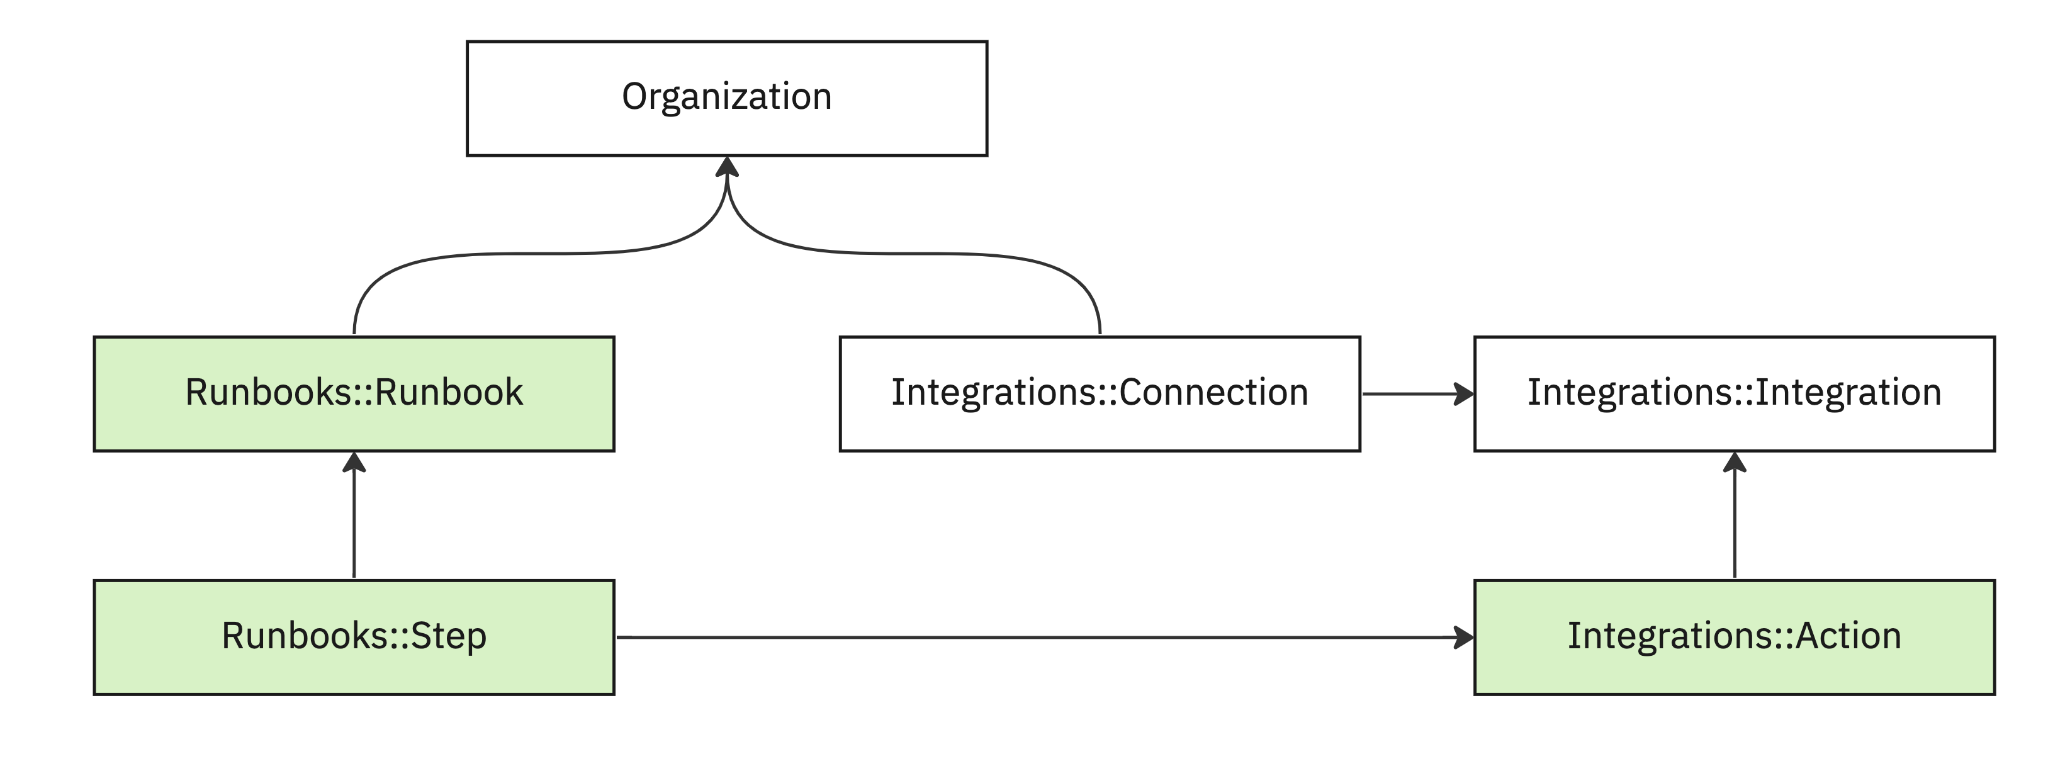 integrations-architecture-image4